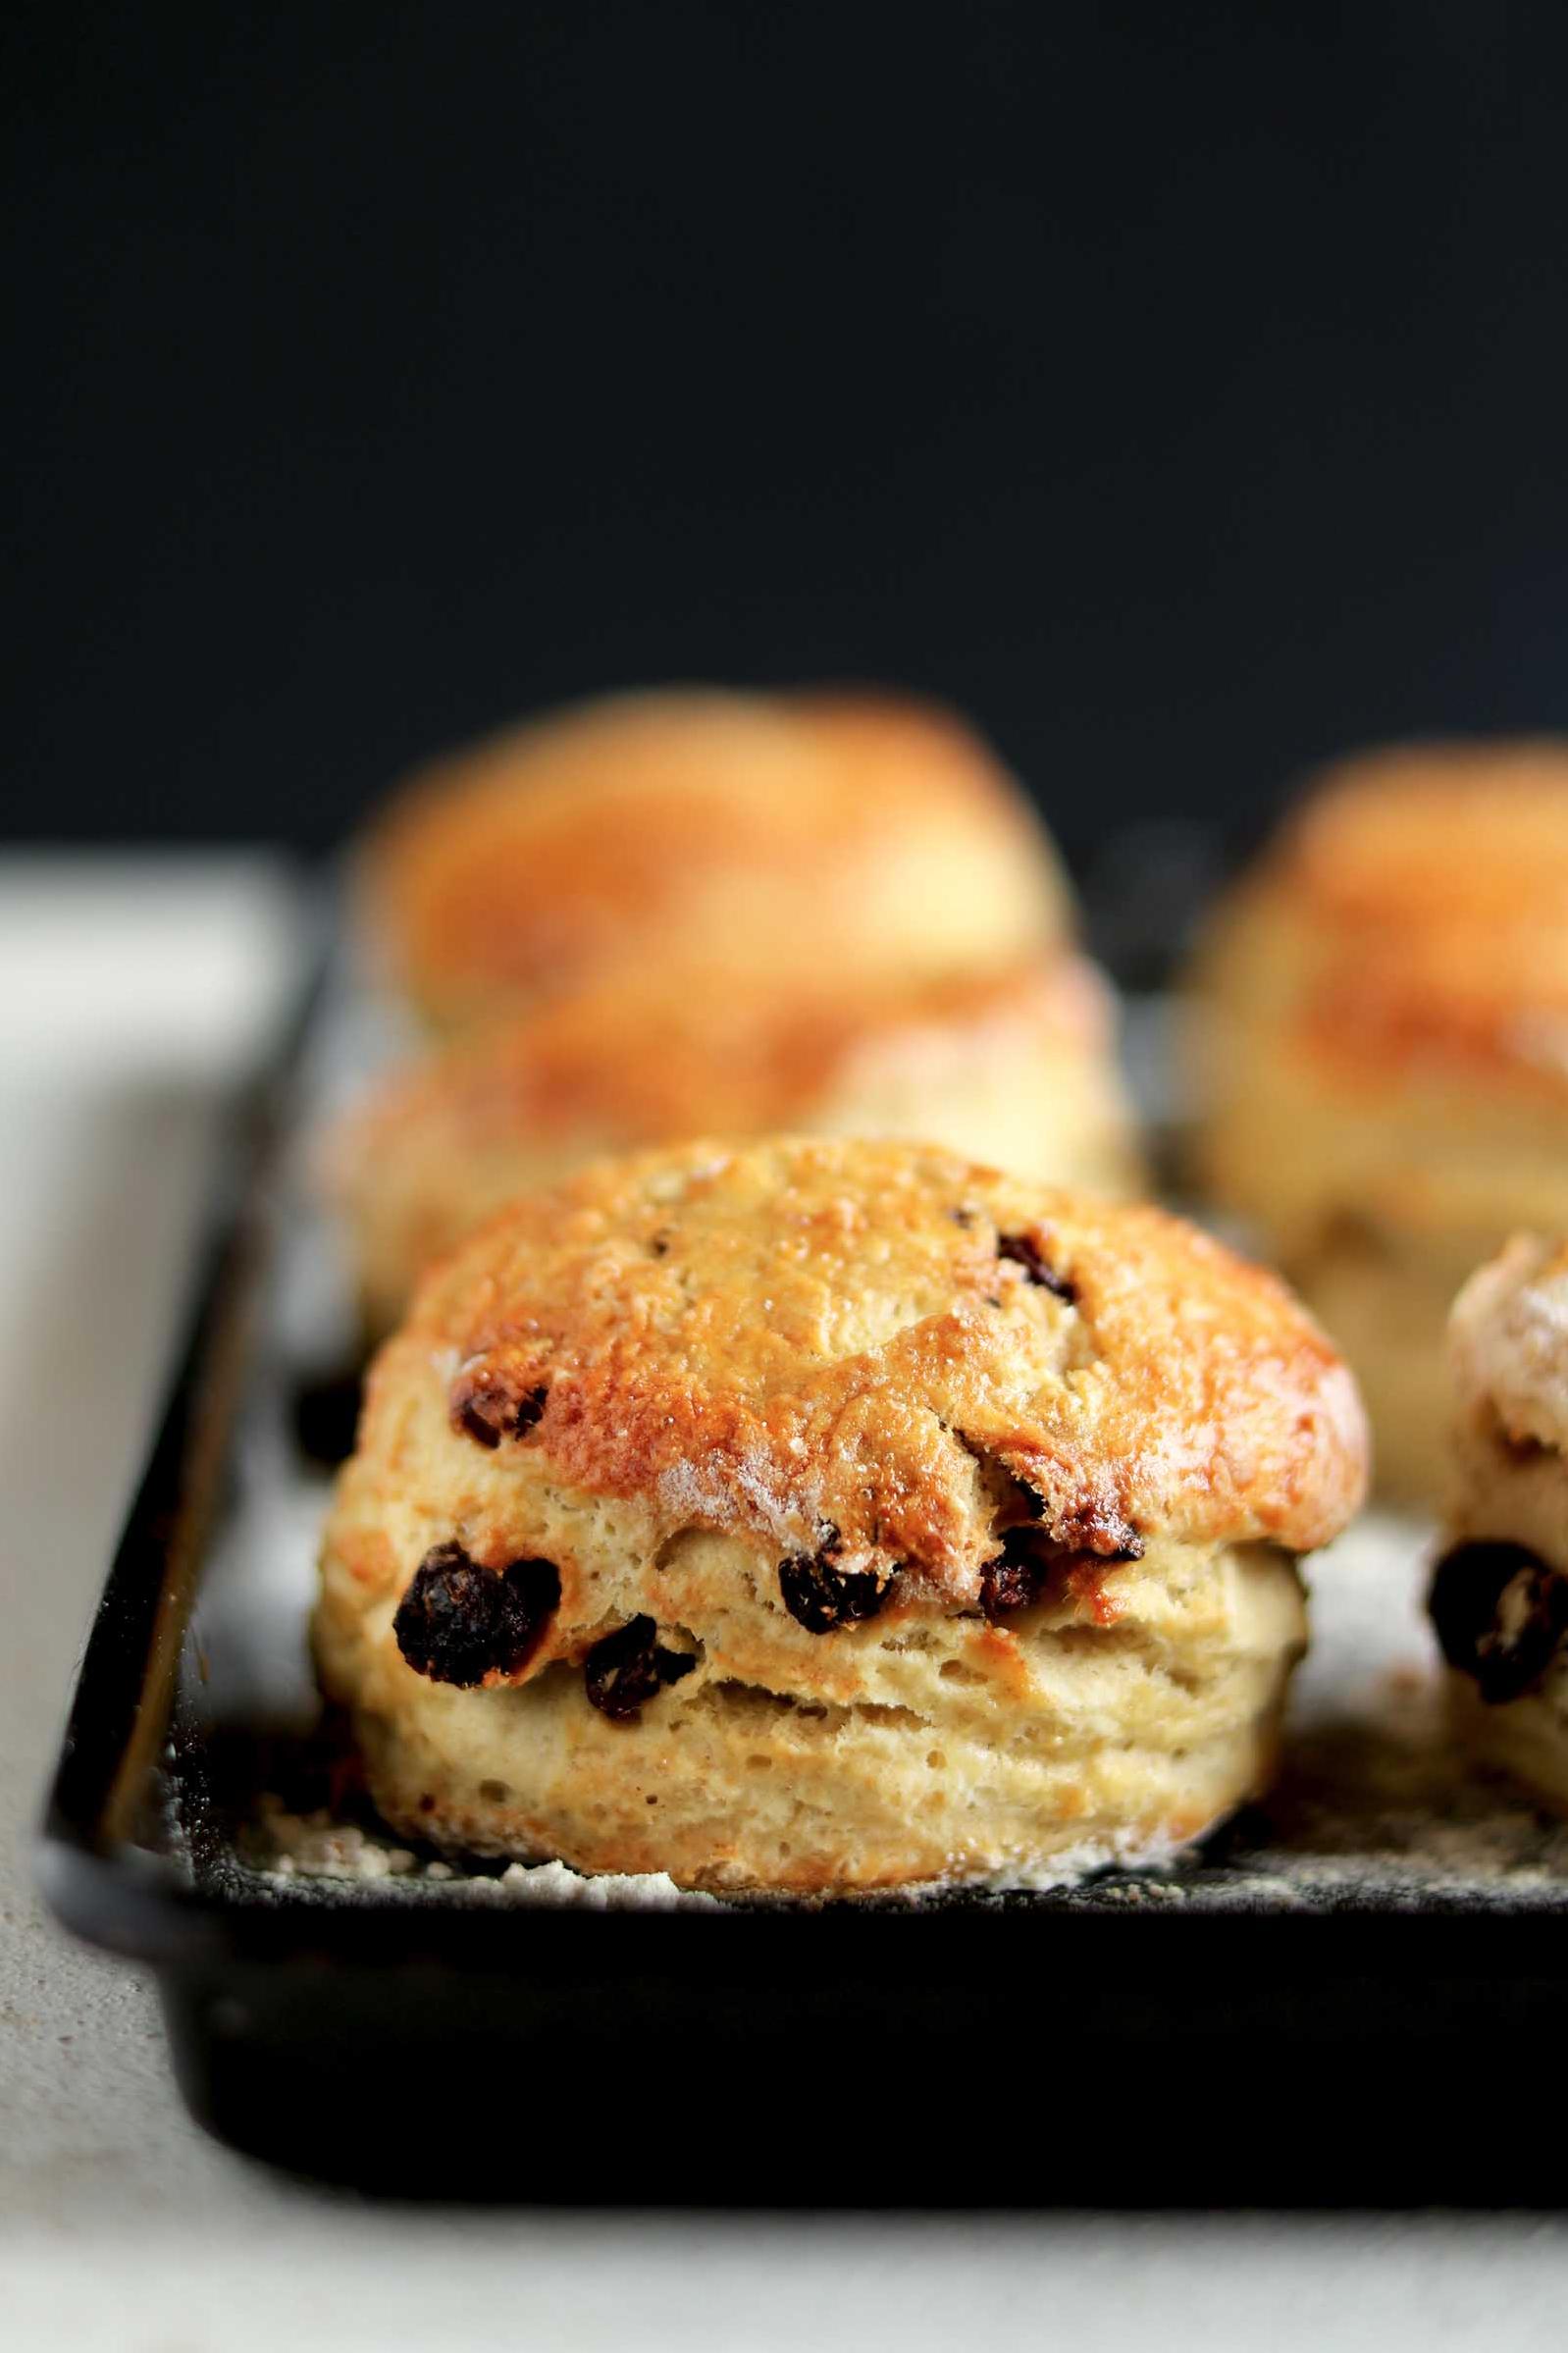  The warm, golden color of this scone is so inviting!